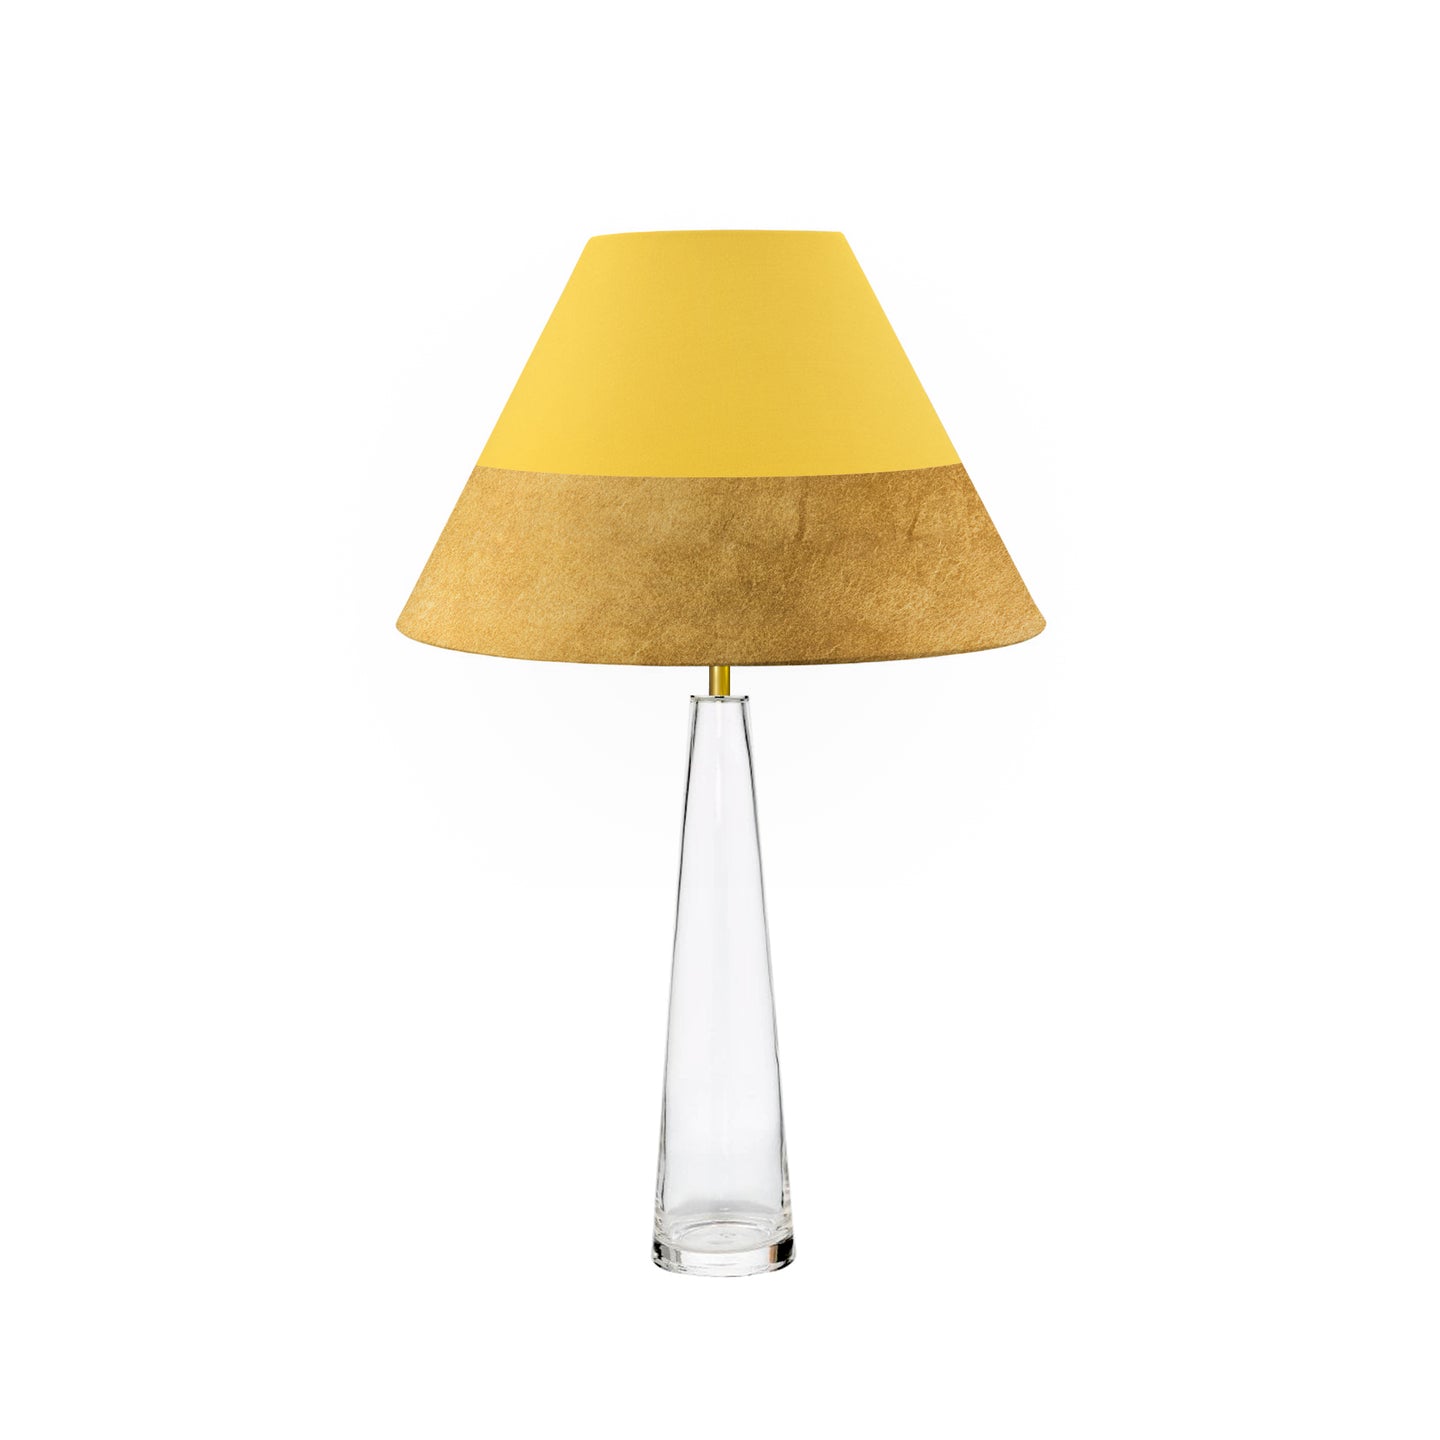 Yellow and Gold Stripes, Conical Lampshade, Conical Lampshade Diameter 30cm and 45cm